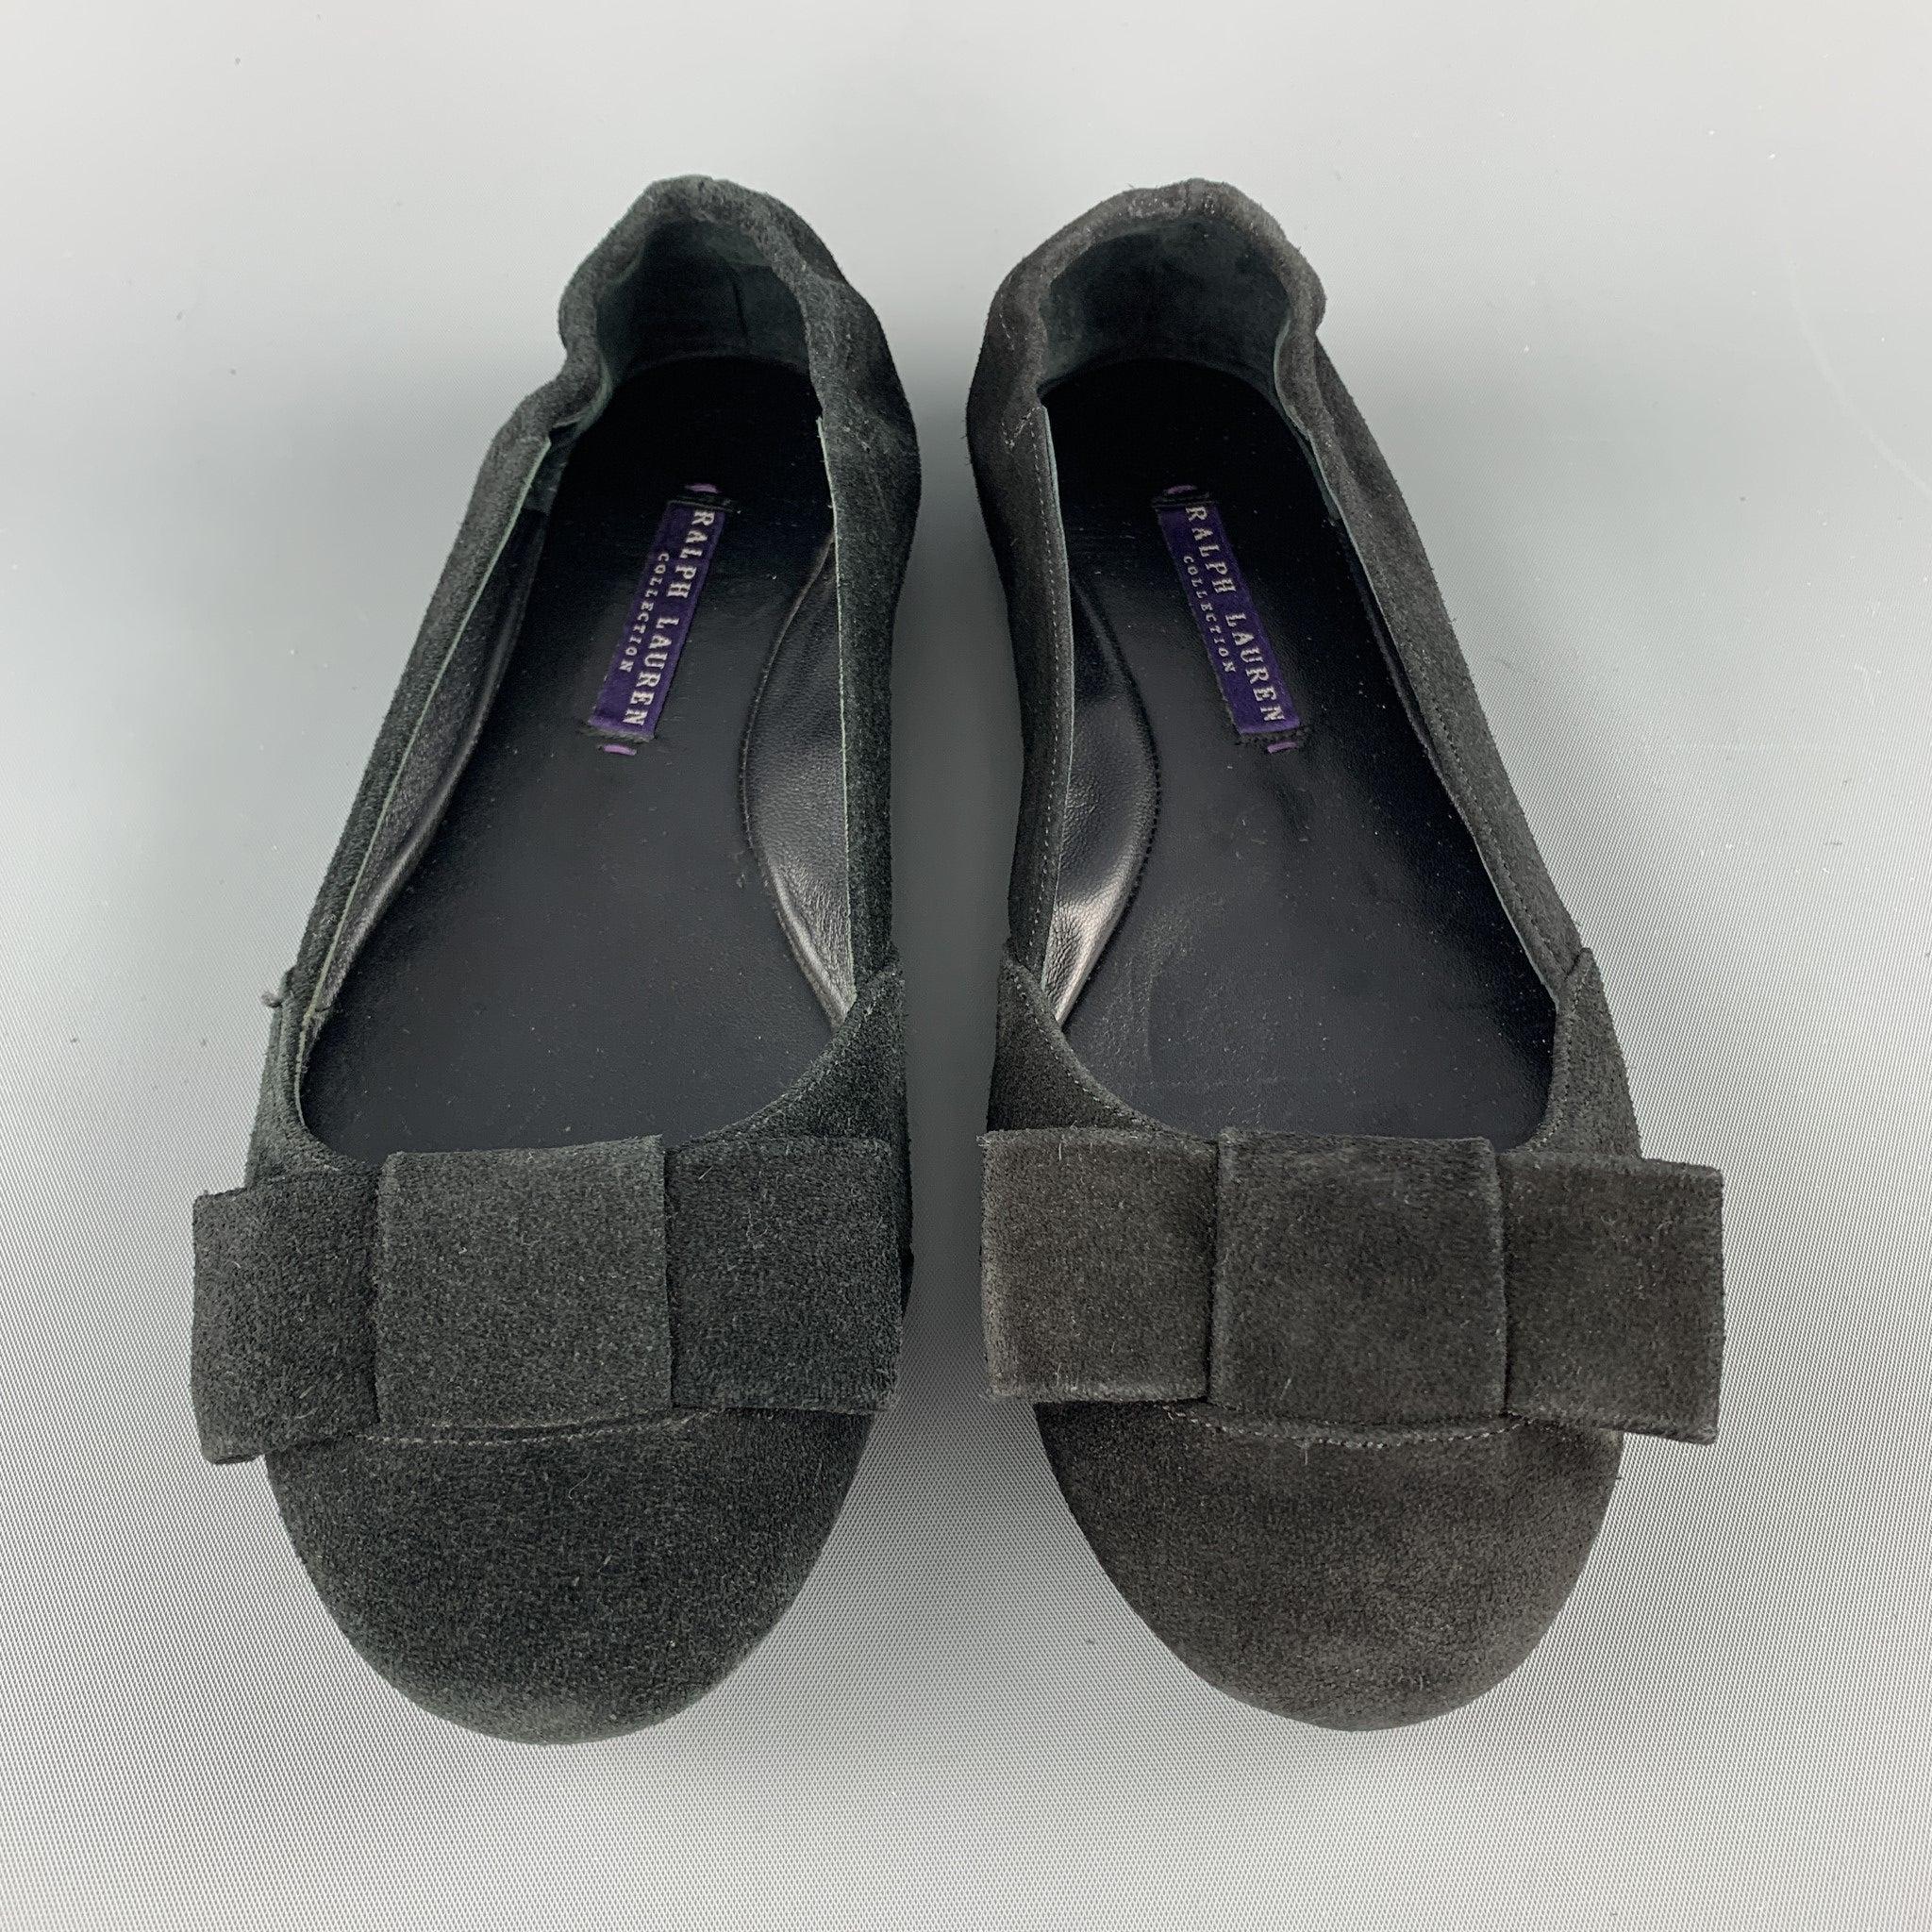 RALPH LAUREN COLLECTION flats come in black suede with a bow accent. Made in Spainches Excellent
Pre-Owned Condition. 

Marked:   US 7 BOutsole: 10 x 3 inches 
  
  
 
Reference: 56680
Category: Flats
More Details
    
Brand:  RALPH LAUREN
Size: 